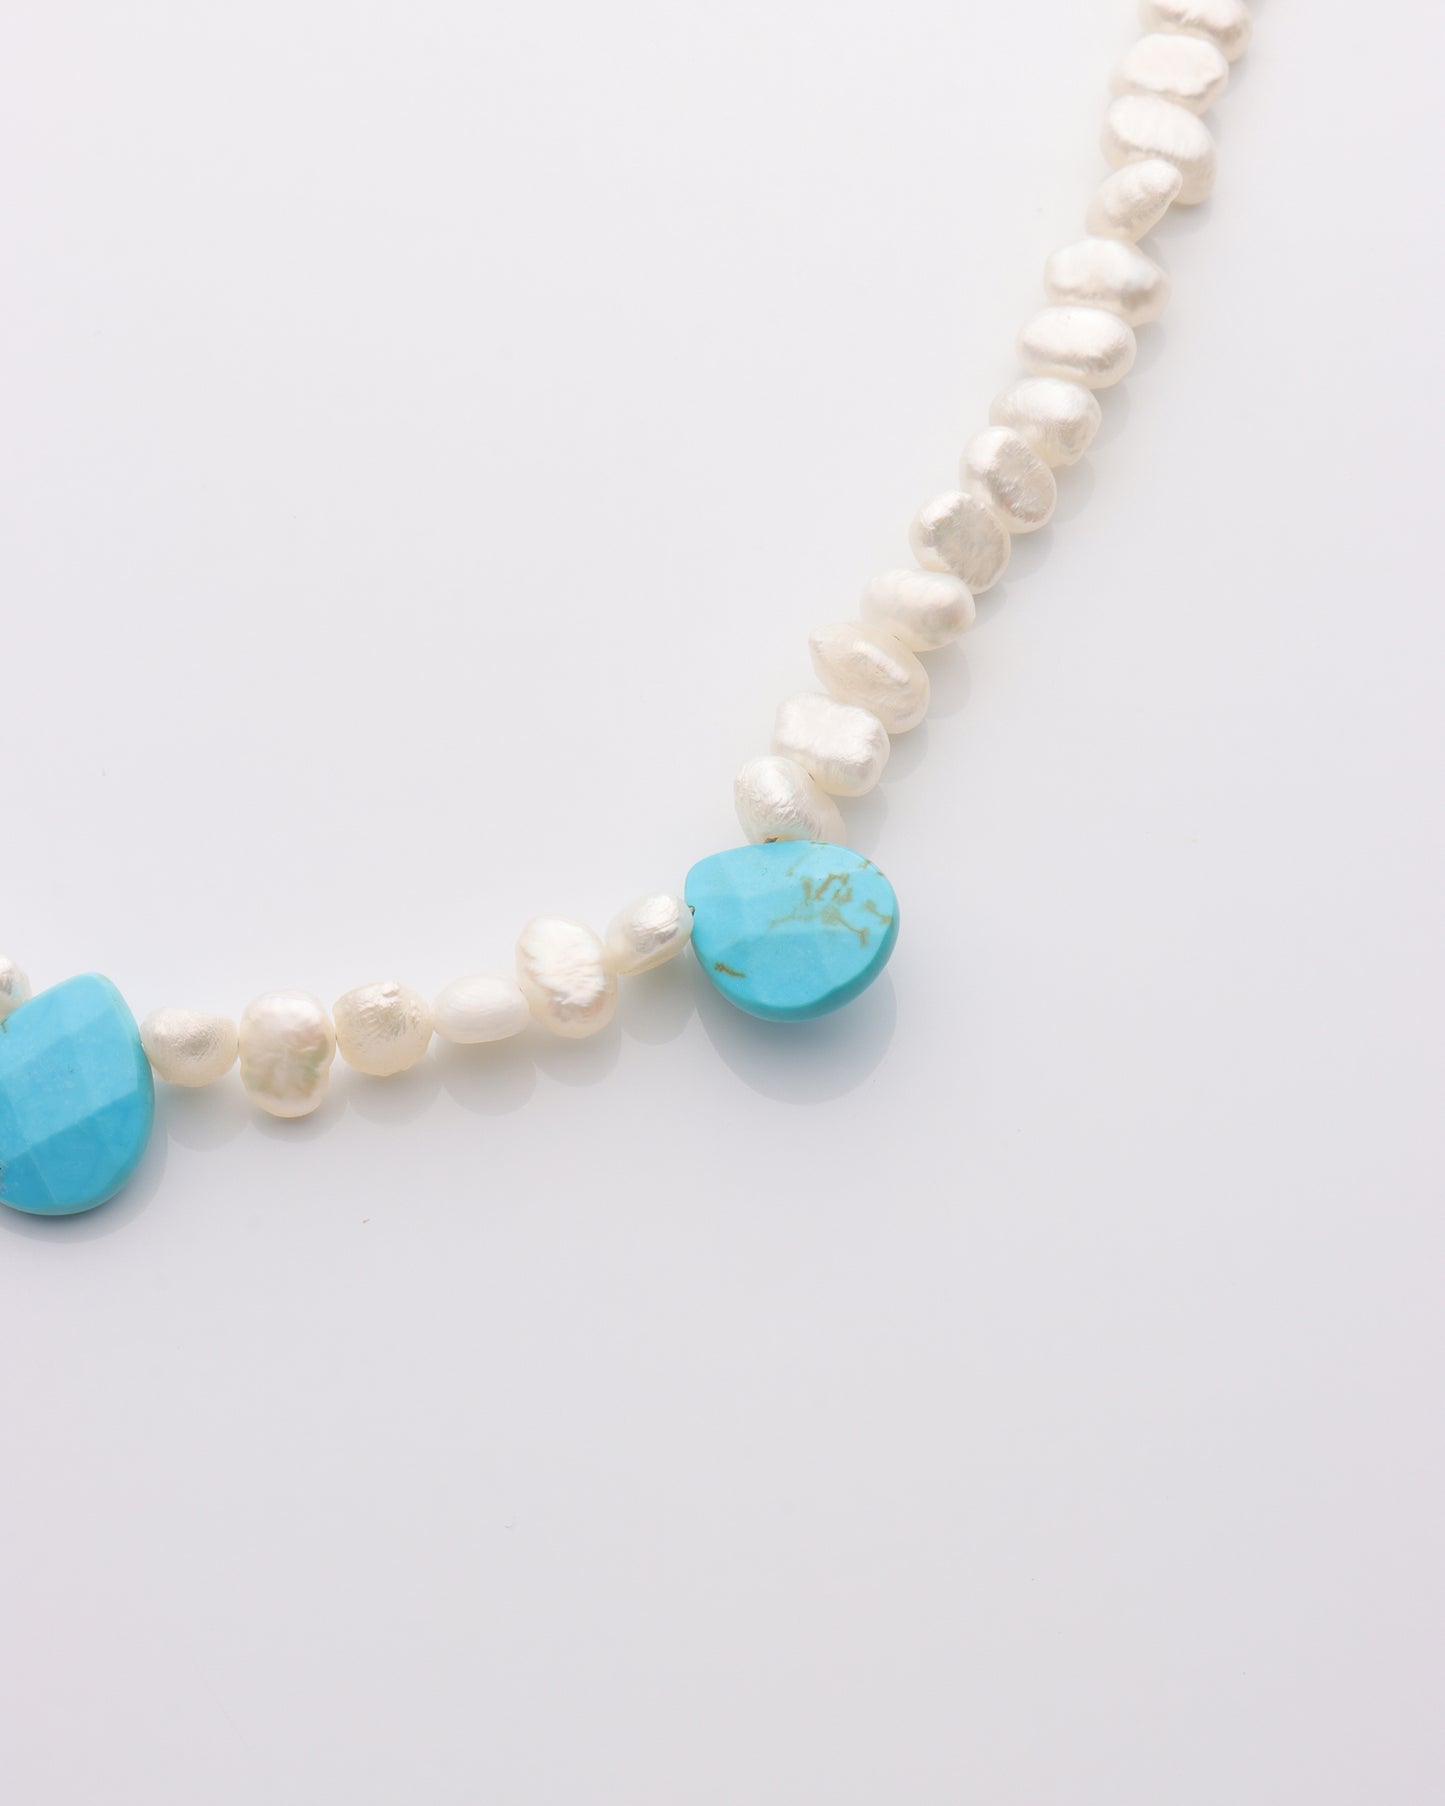 Easy Beach Day Pearl and Turquoise Necklace